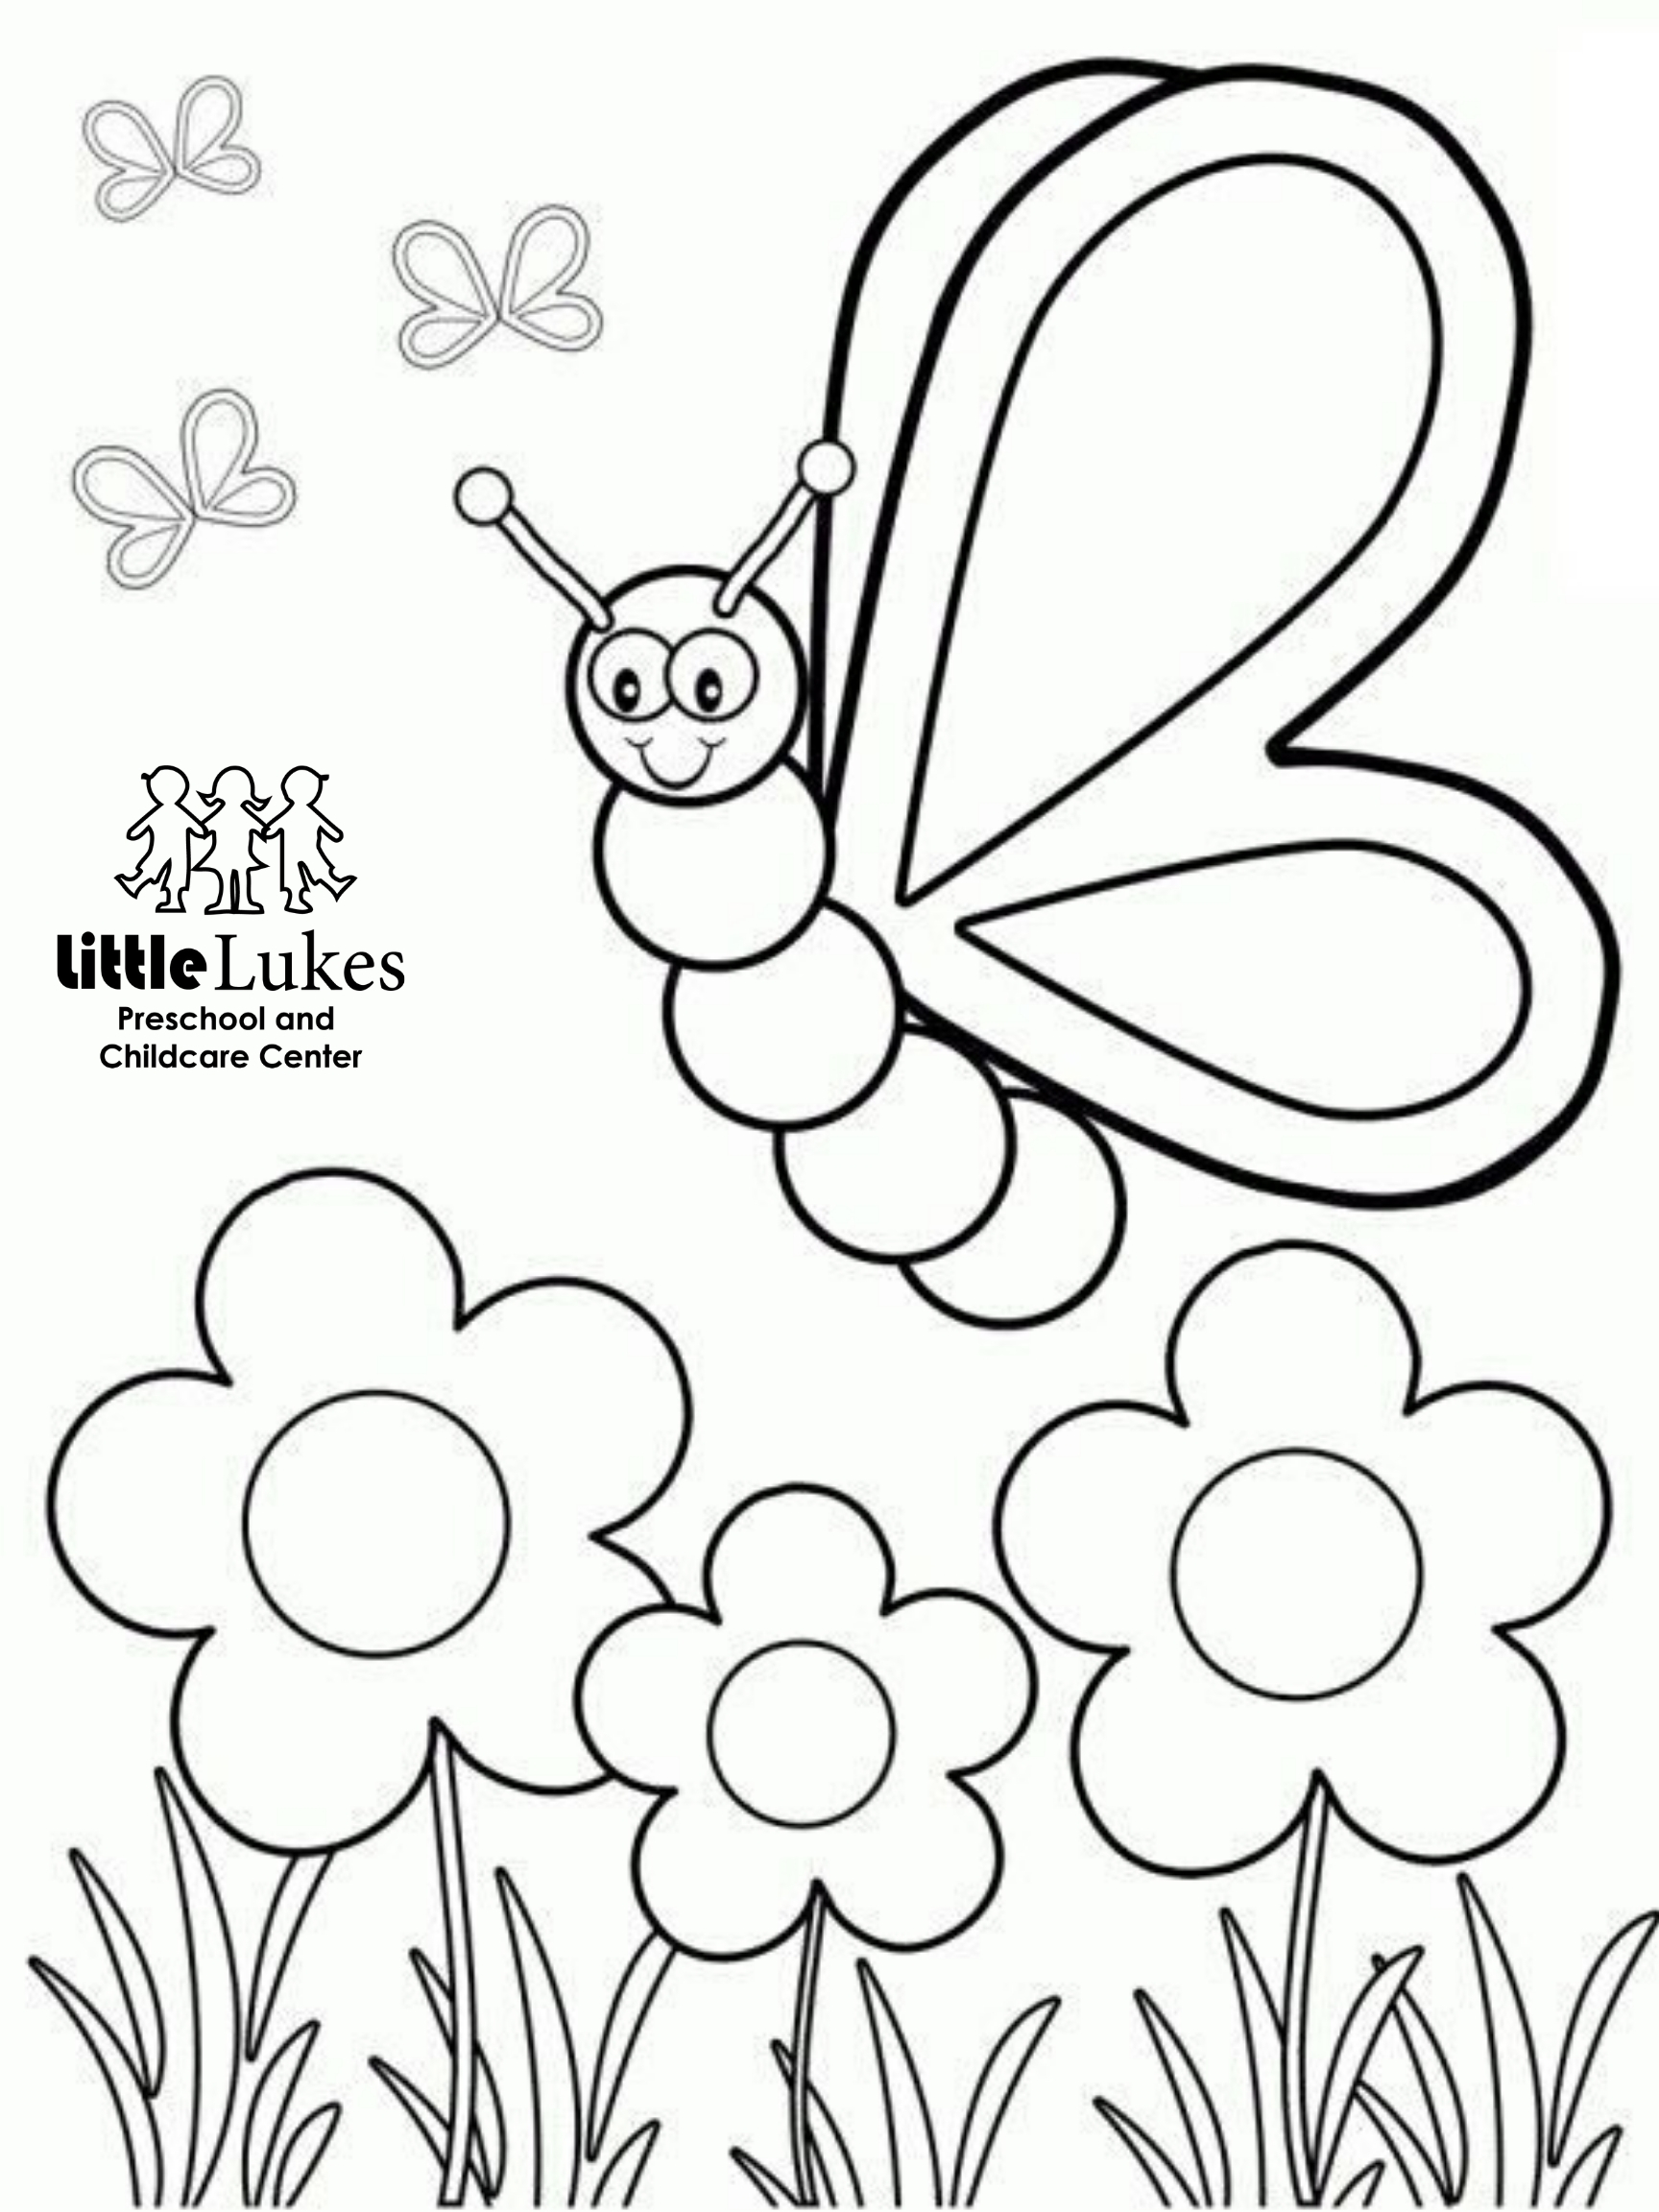 FREE Spring Coloring Pages   Little Lukes Preschool and Childcare ...